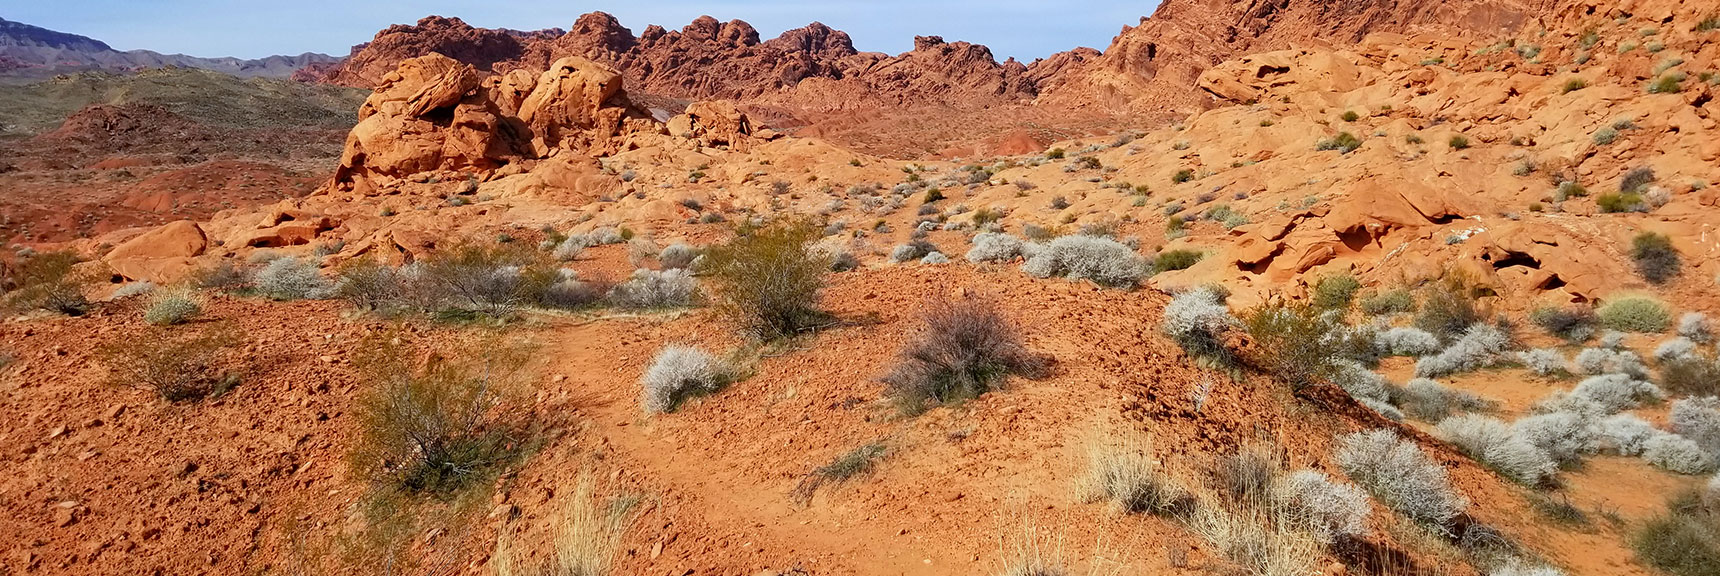 Connecting to a Trail in the Red Rock Hills South of Elephant Rock Loop in Valley of Fire State Park, Nevada